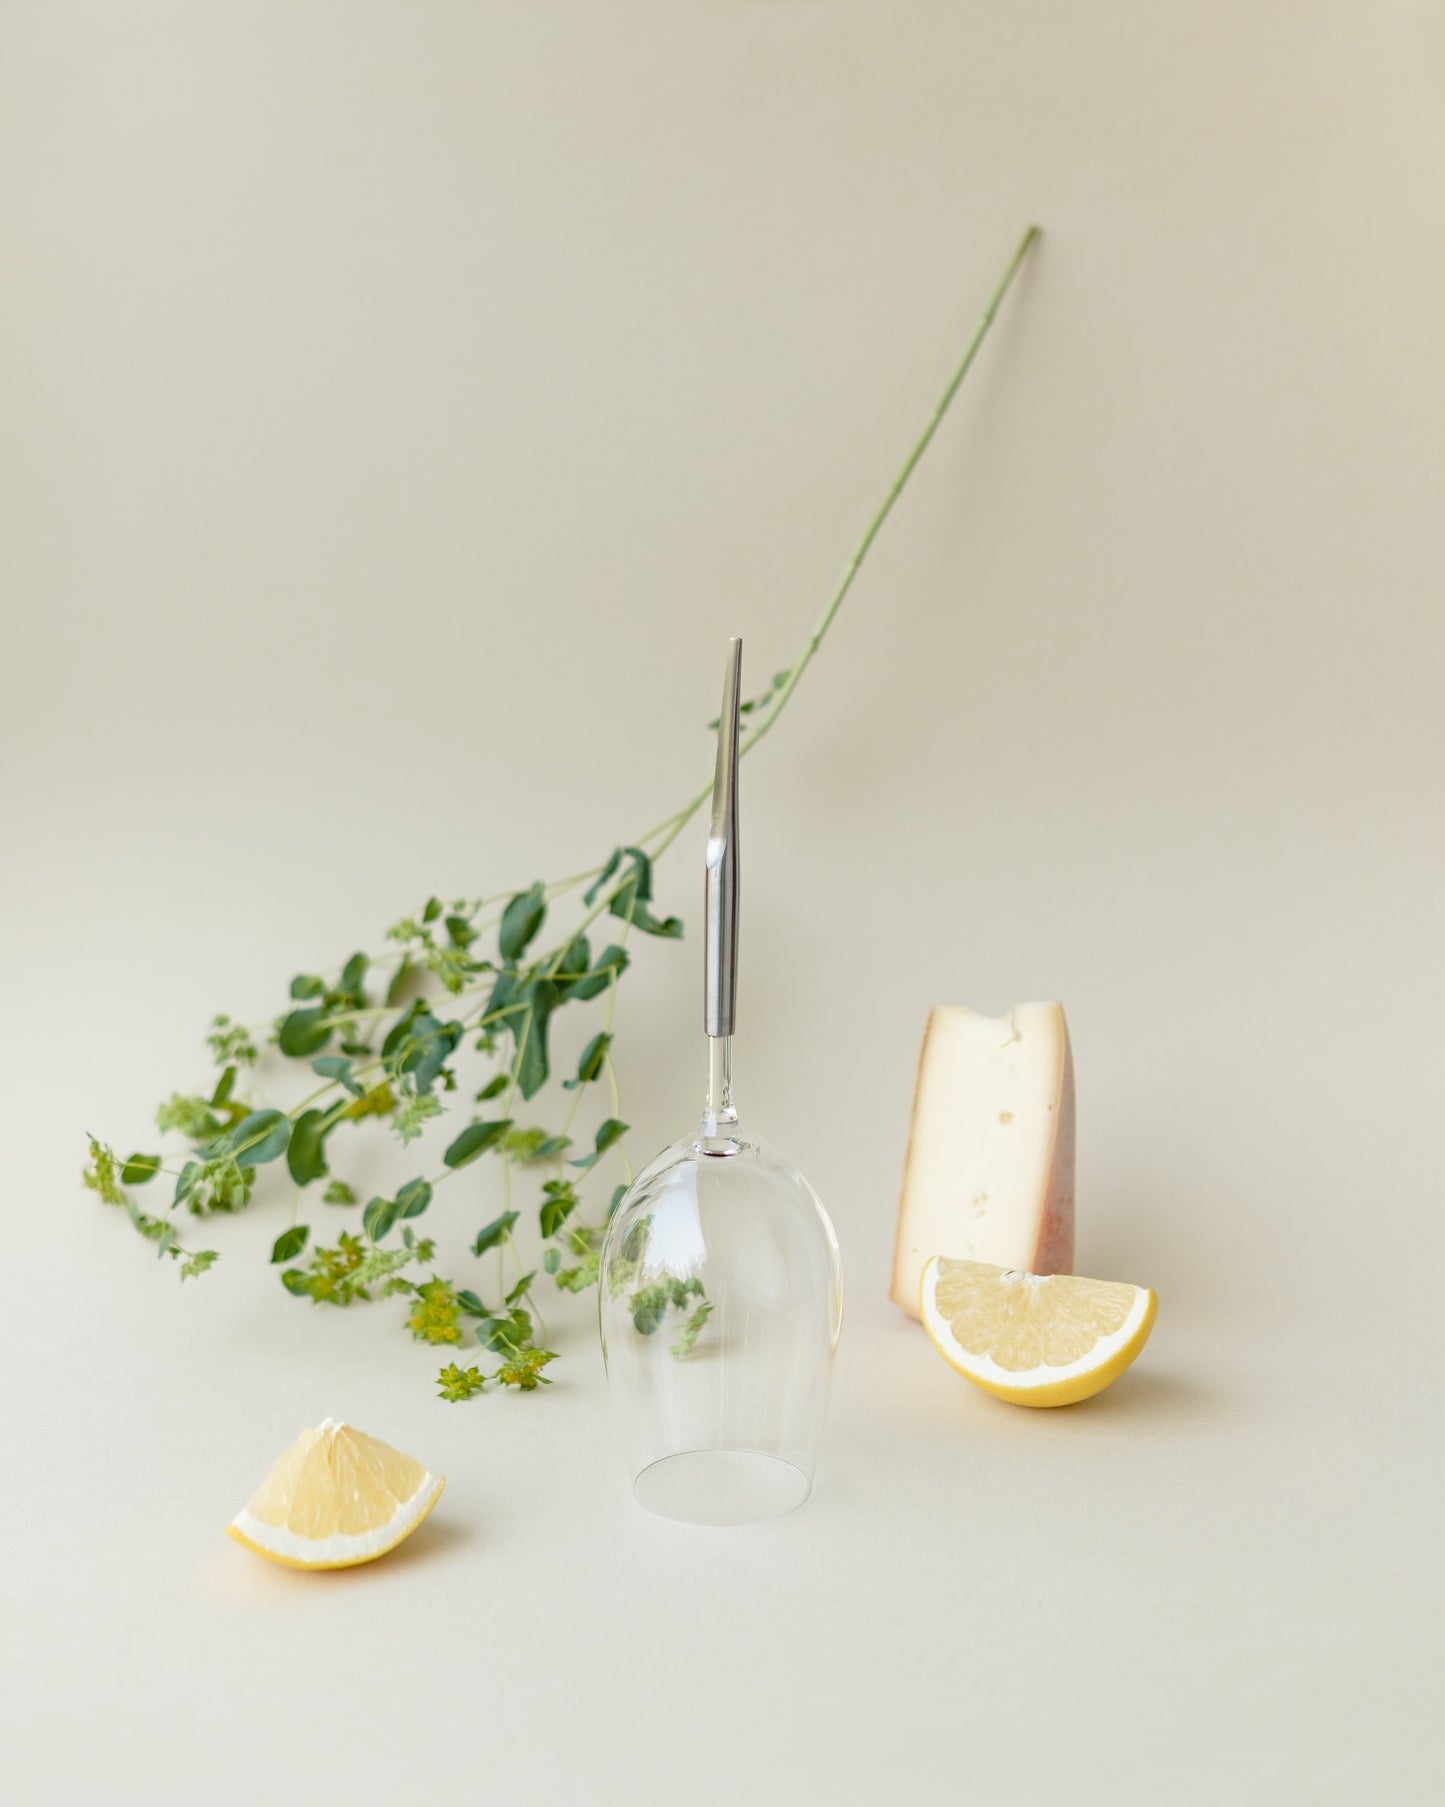 picnic wine glass with metal pin for picnic and for white wine, placed next to cheese, lemon slices and a plant